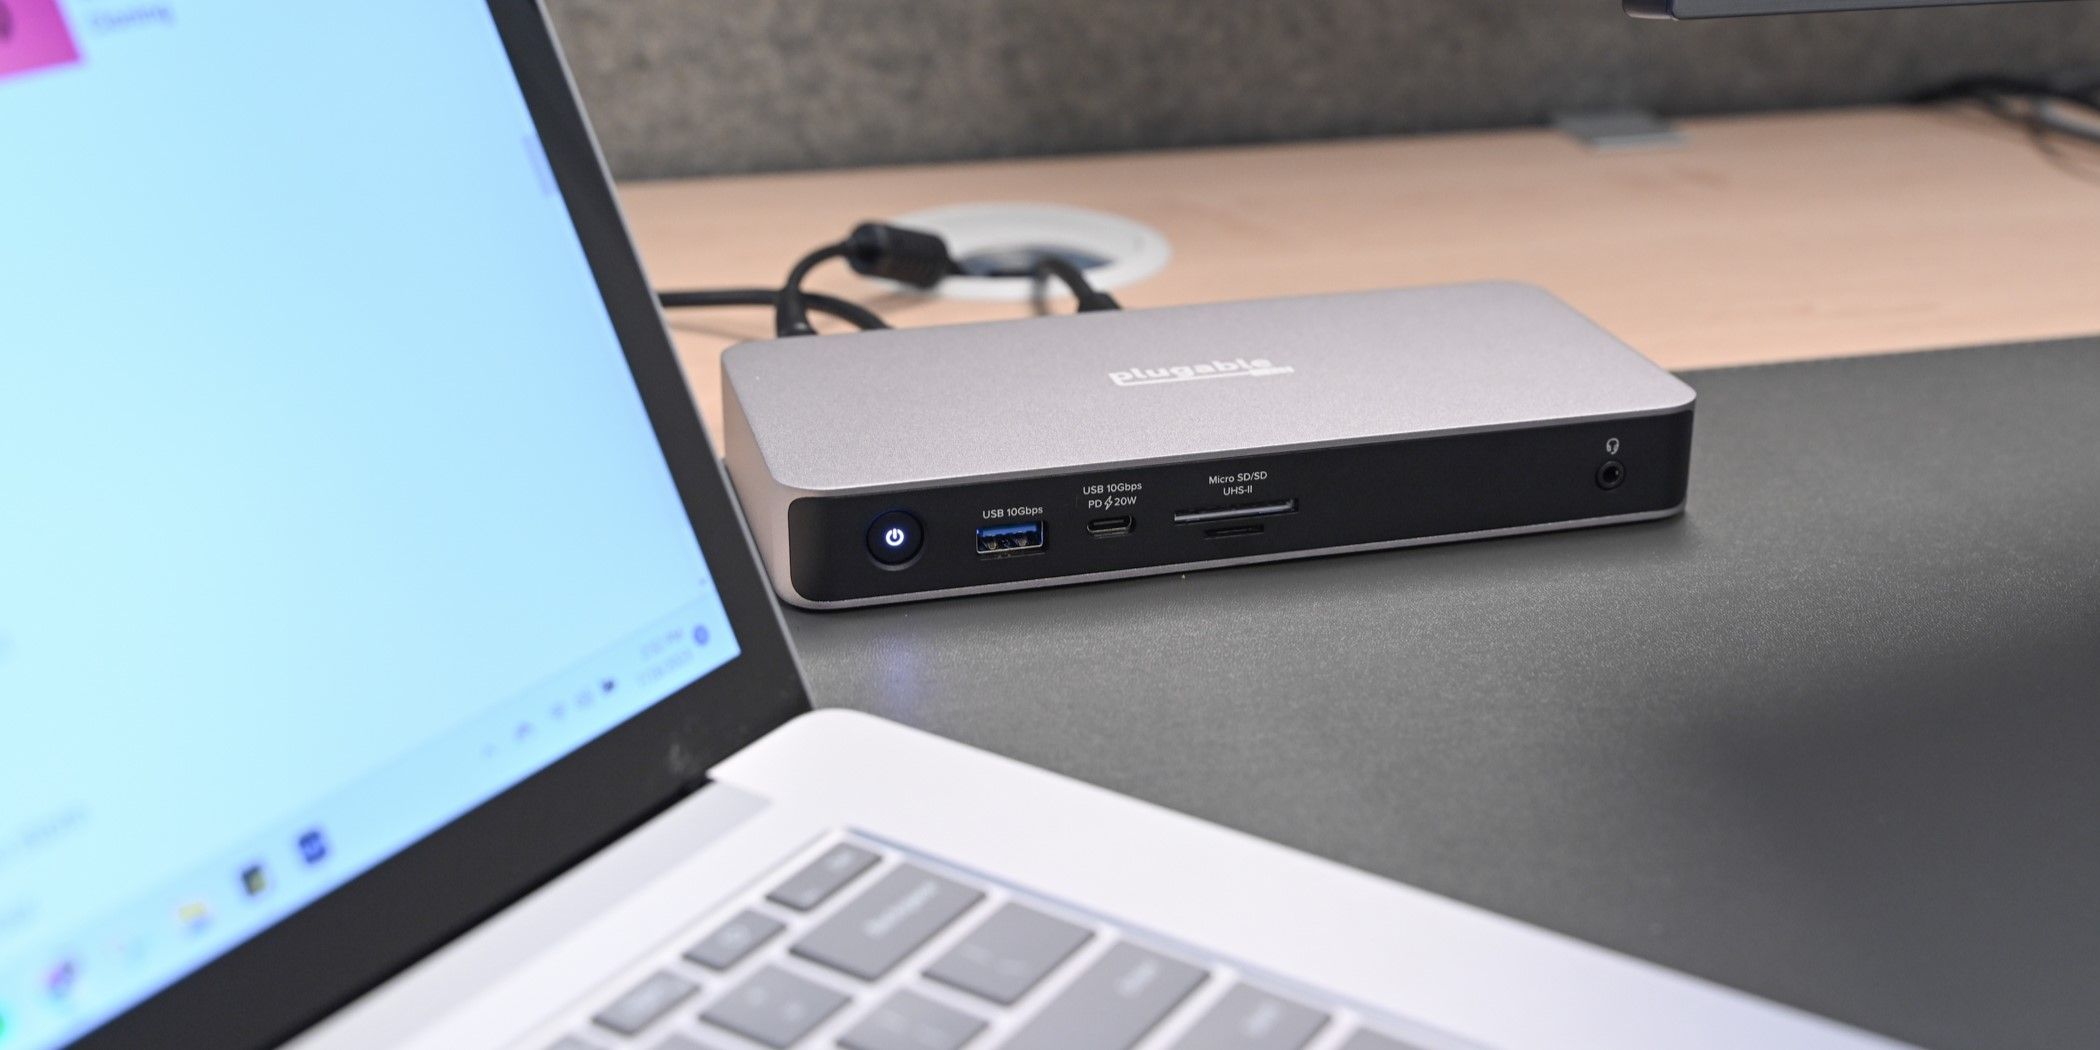 Plugable docking station connected to a laptop and monitor